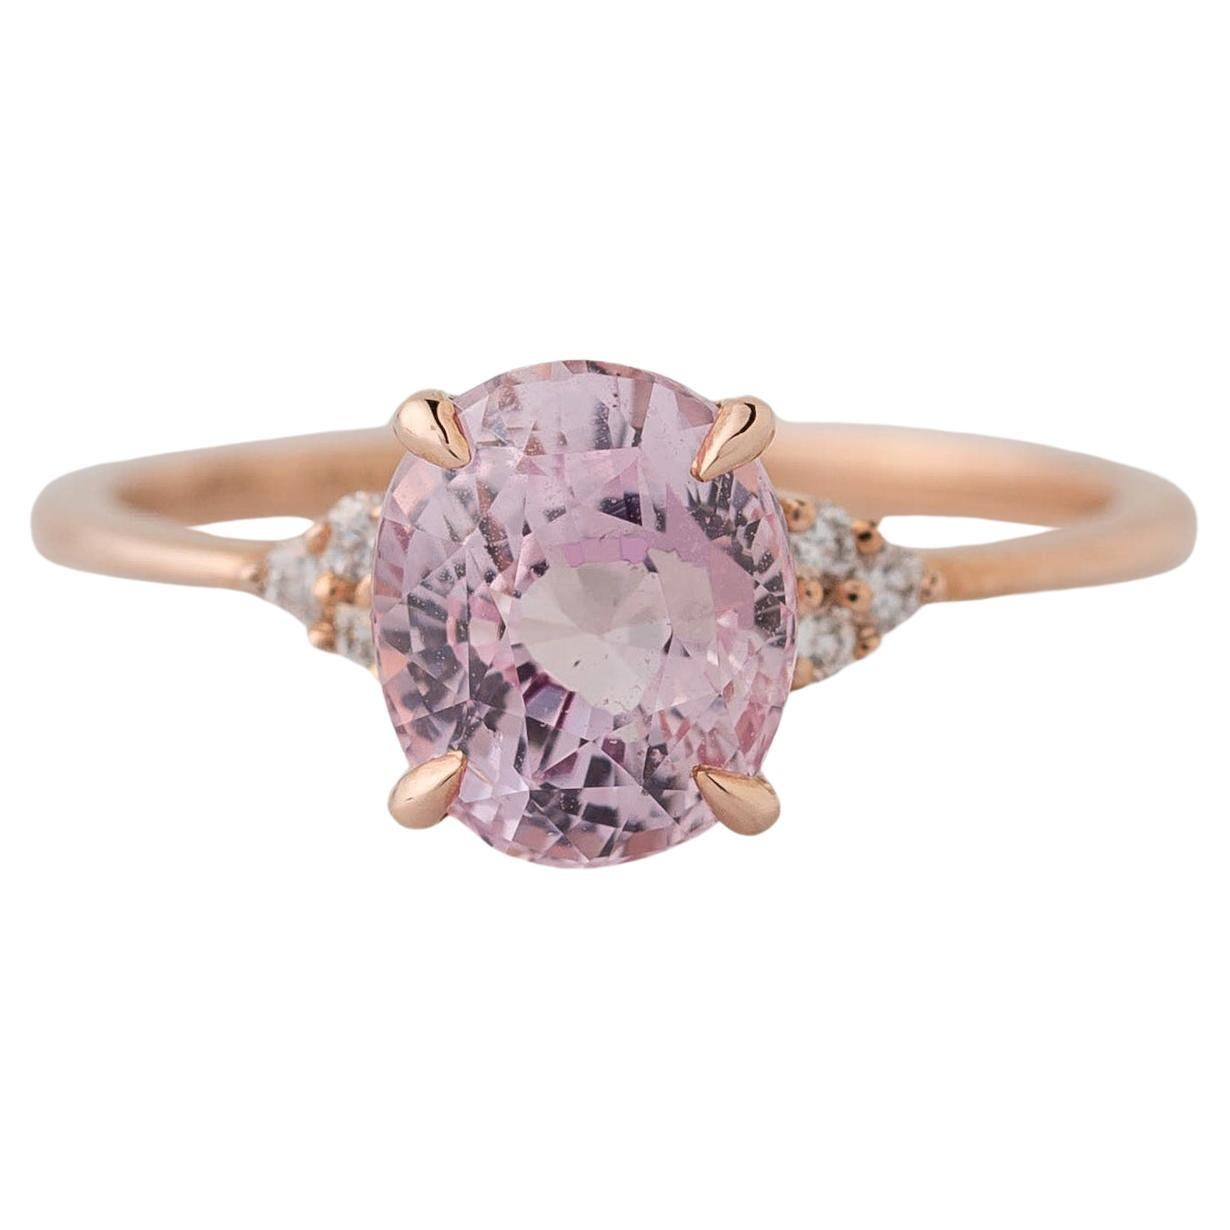 For Sale:  GIA Certified 2.31 Carat Oval Natural Pink Sapphire Diamond Ring